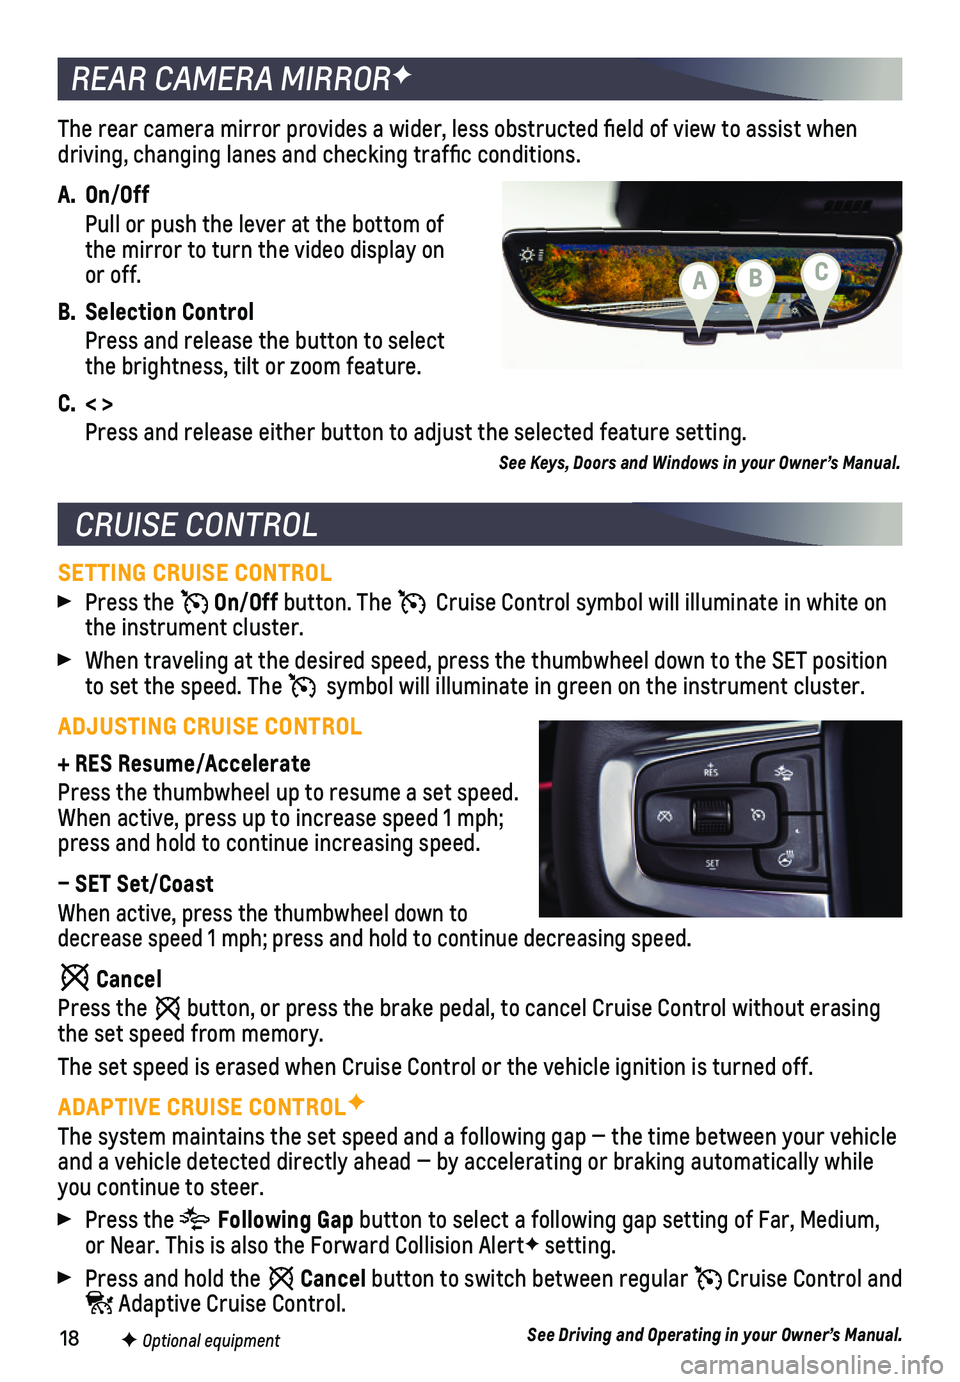 CHEVROLET BLAZER 2019  Get To Know Guide 18
The rear camera mirror provides a wider, less obstructed field of view\
 to assist when driving, changing lanes and checking traffic conditions. 
A. On/Off
 Pull or push the lever at the bottom of 